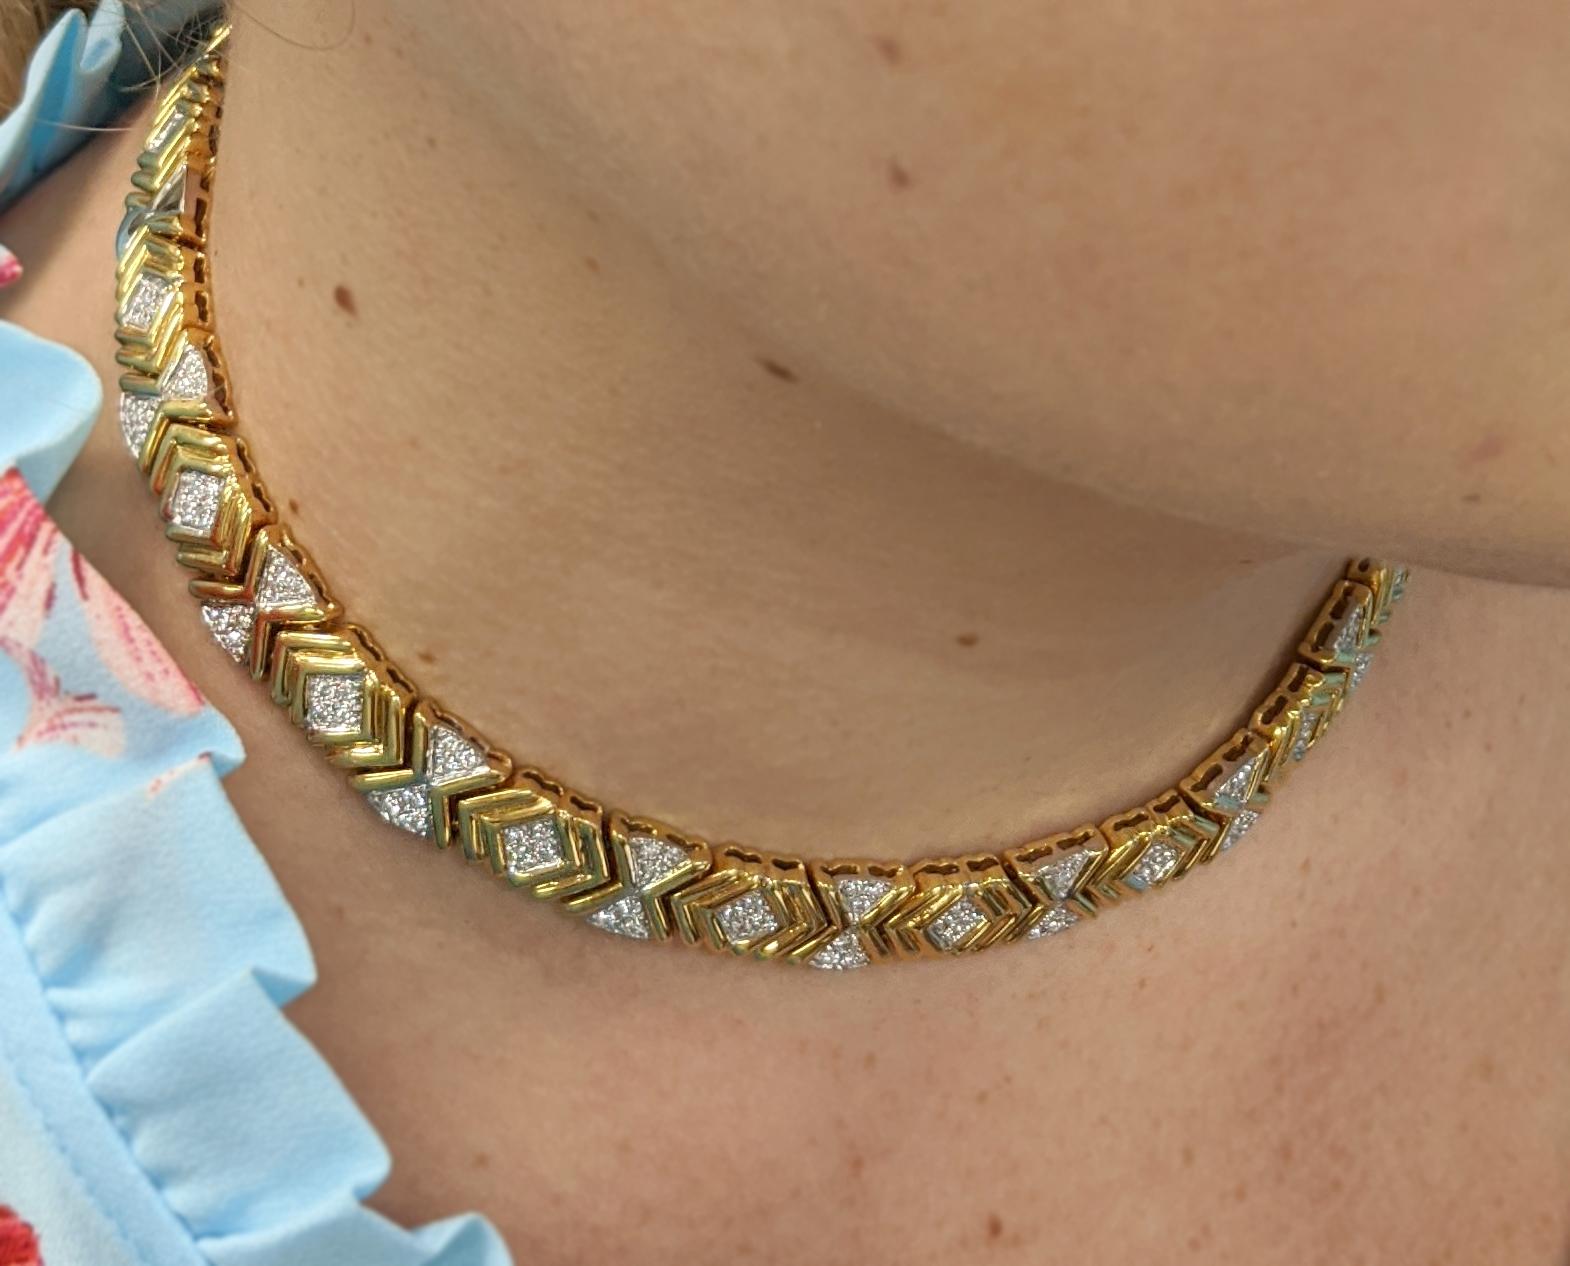 This retro necklace fabricated in 14k yellow gold features geometric links interspersed with round diamonds set atop 14k white god stations.

The necklace contains approximately 110 round cut diamonds having an average color of G and average clarity